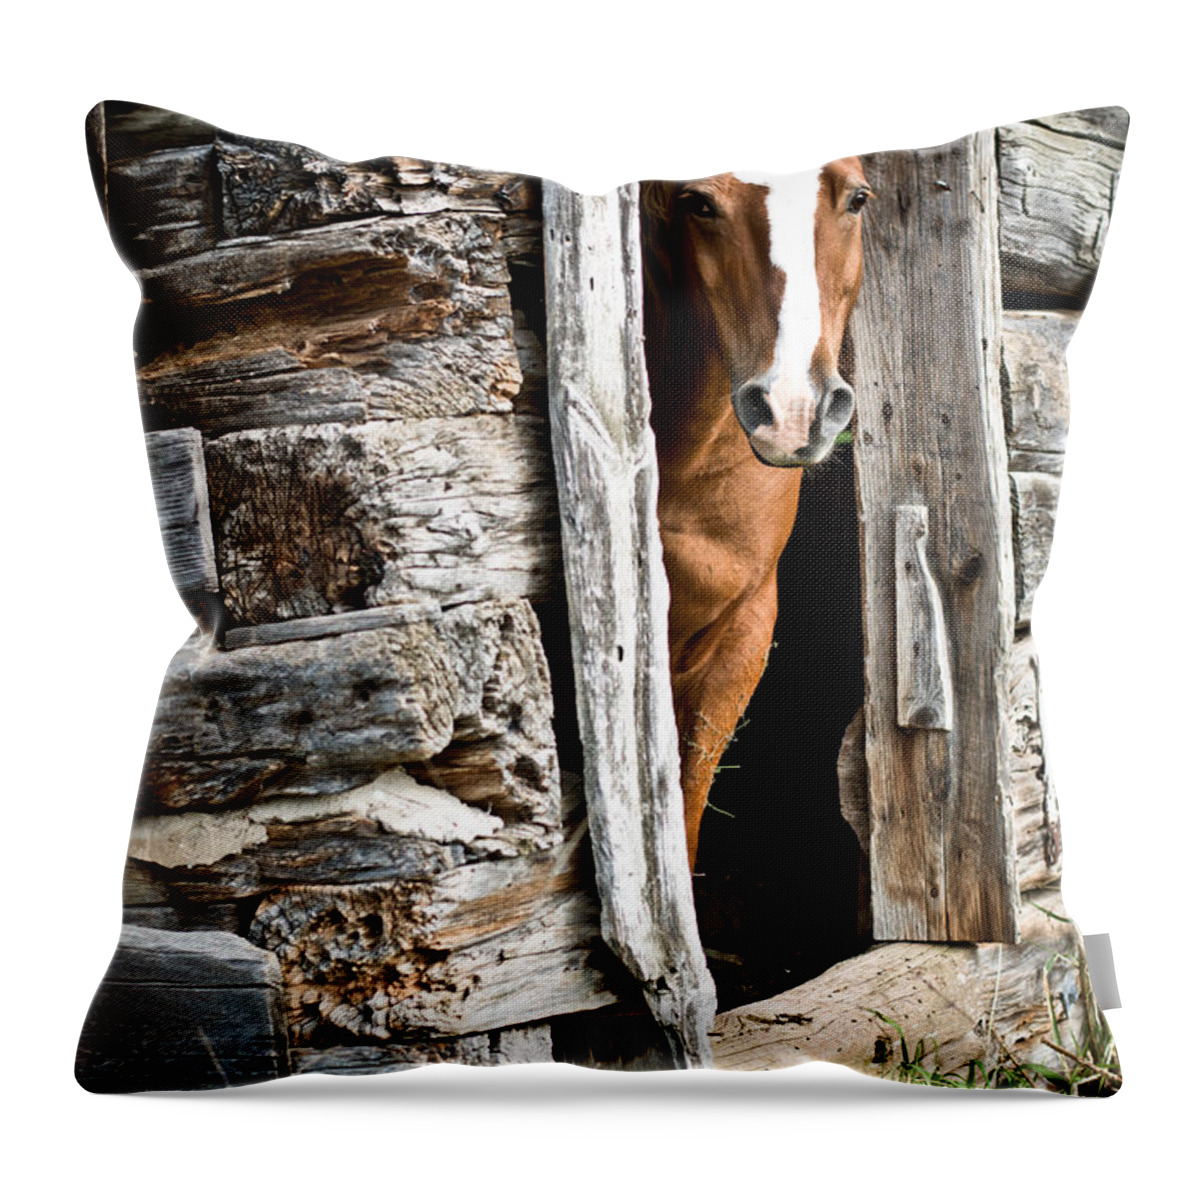  Throw Pillow featuring the photograph Rustic Horse Scene by Cheryl Baxter